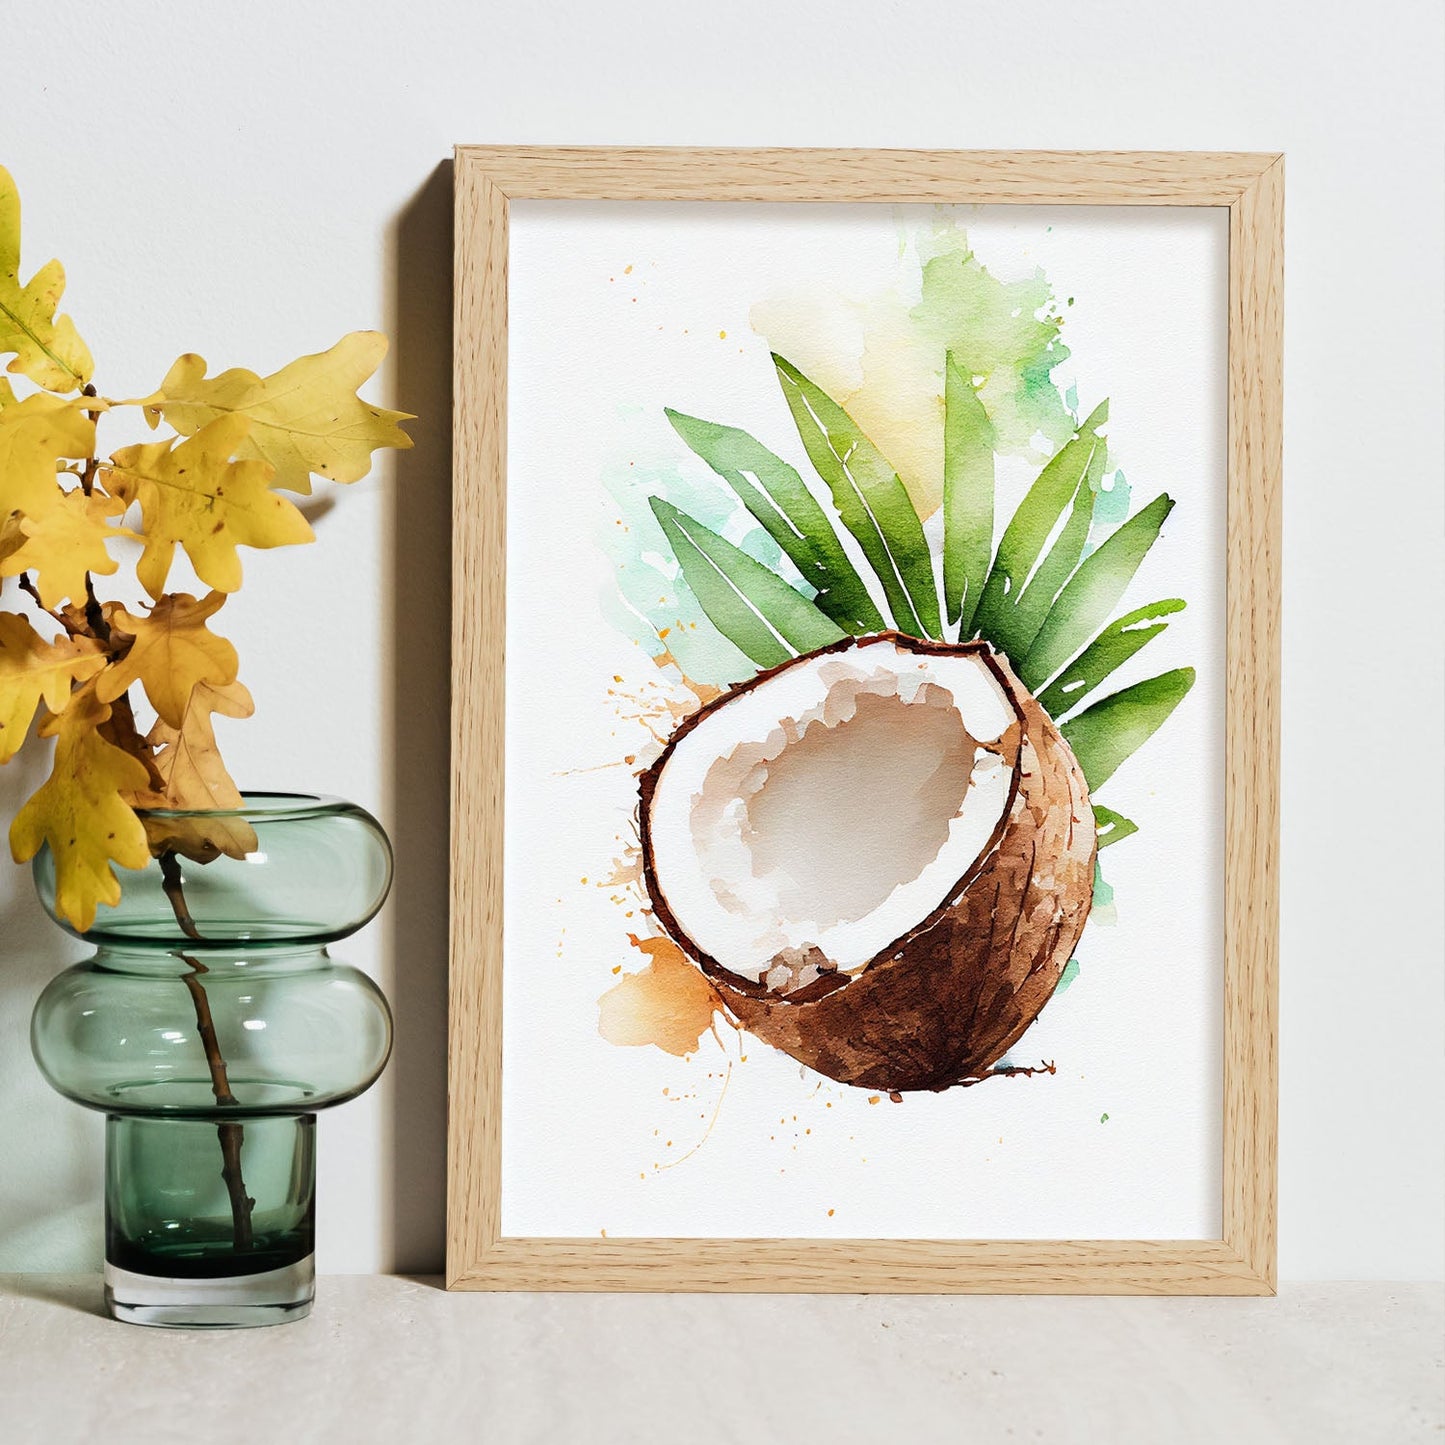 Nacnic minimalist Coconut_2. Aesthetic Wall Art Prints for Bedroom or Living Room Design.